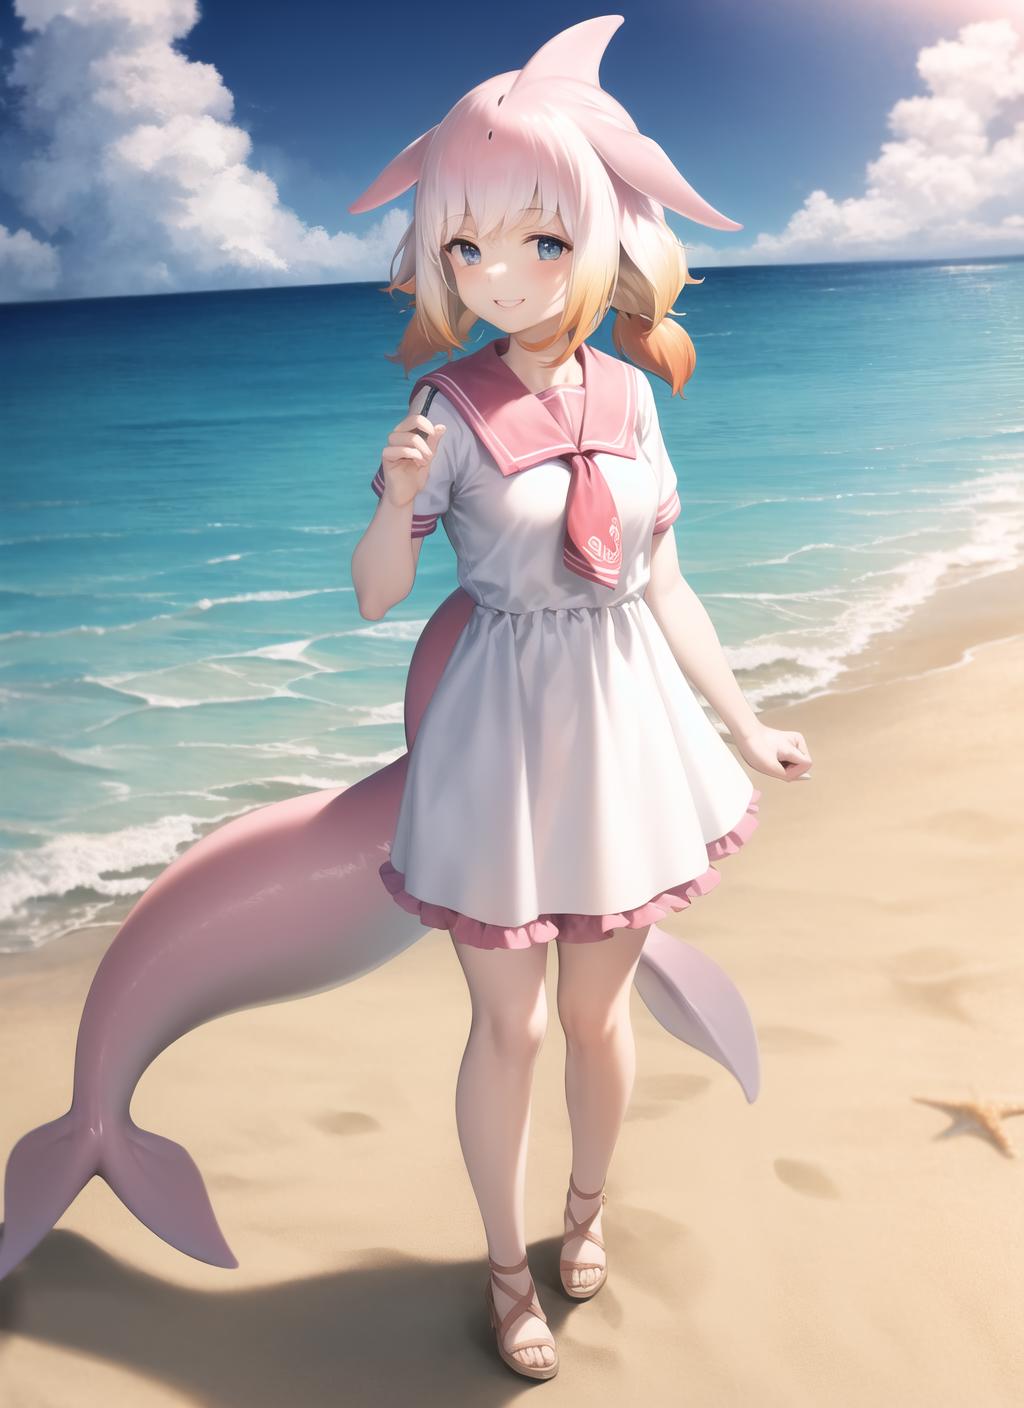 Chinese White Dolphin Kemono Friends | Character Lora 76 image by Numeratic